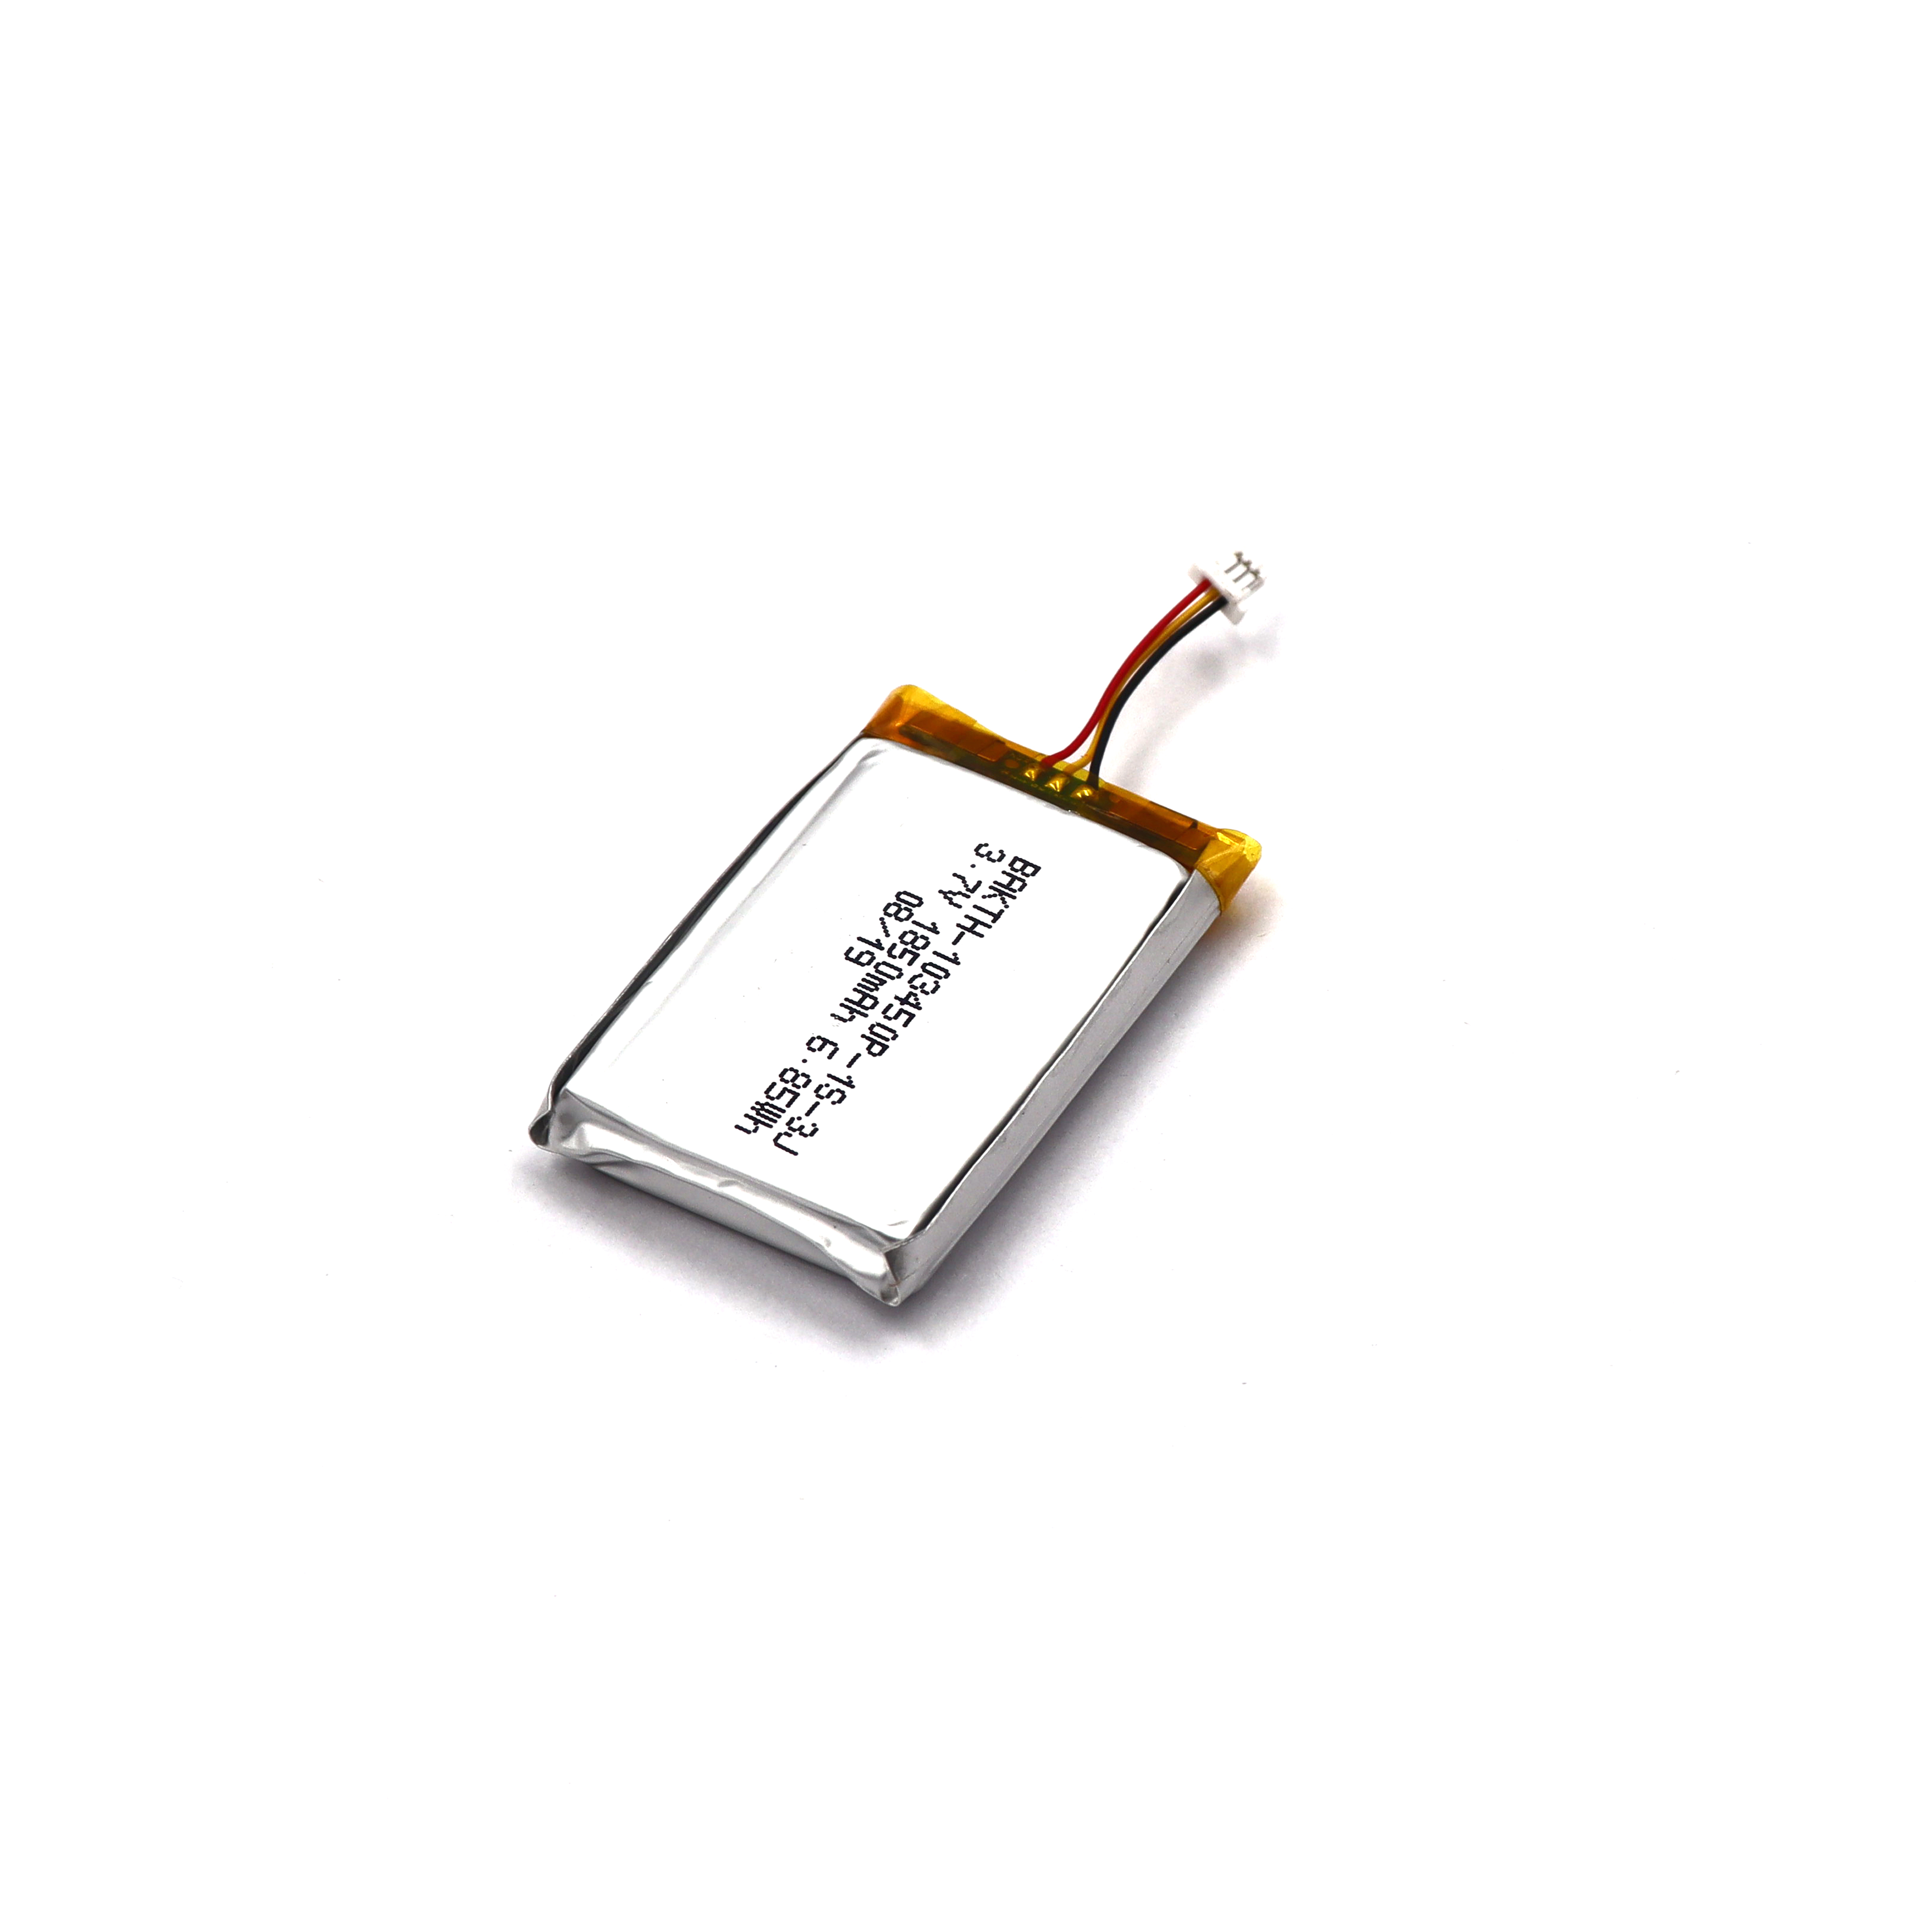 3.7V 1850mAh Rechargeable Lithium polymer Battery Pack for Consumer